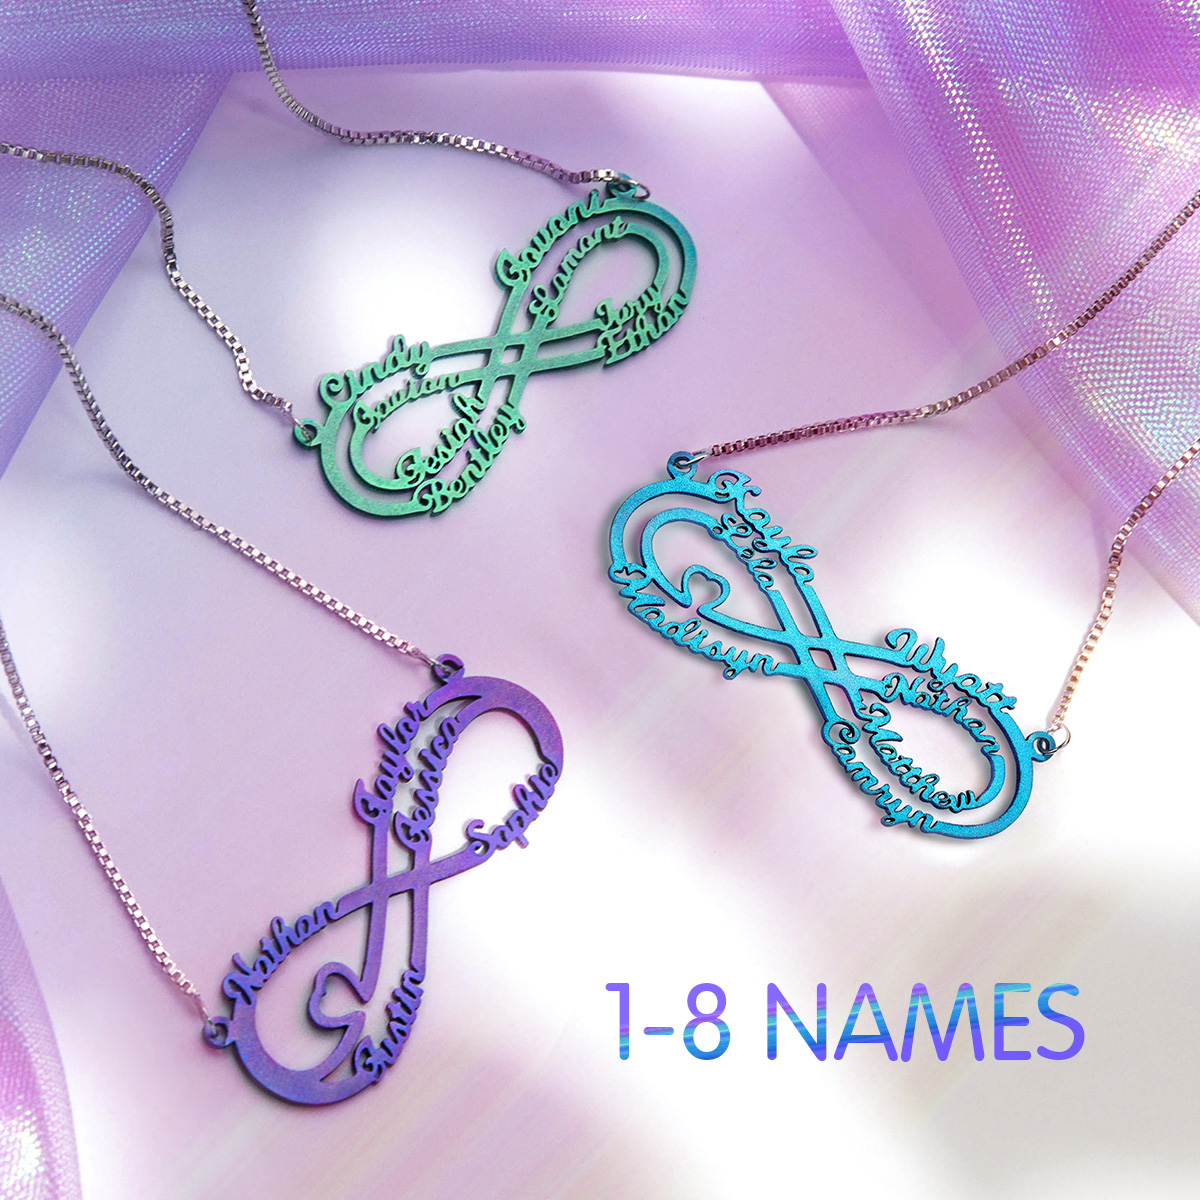 Personalized Colorful Infinity Name Necklace